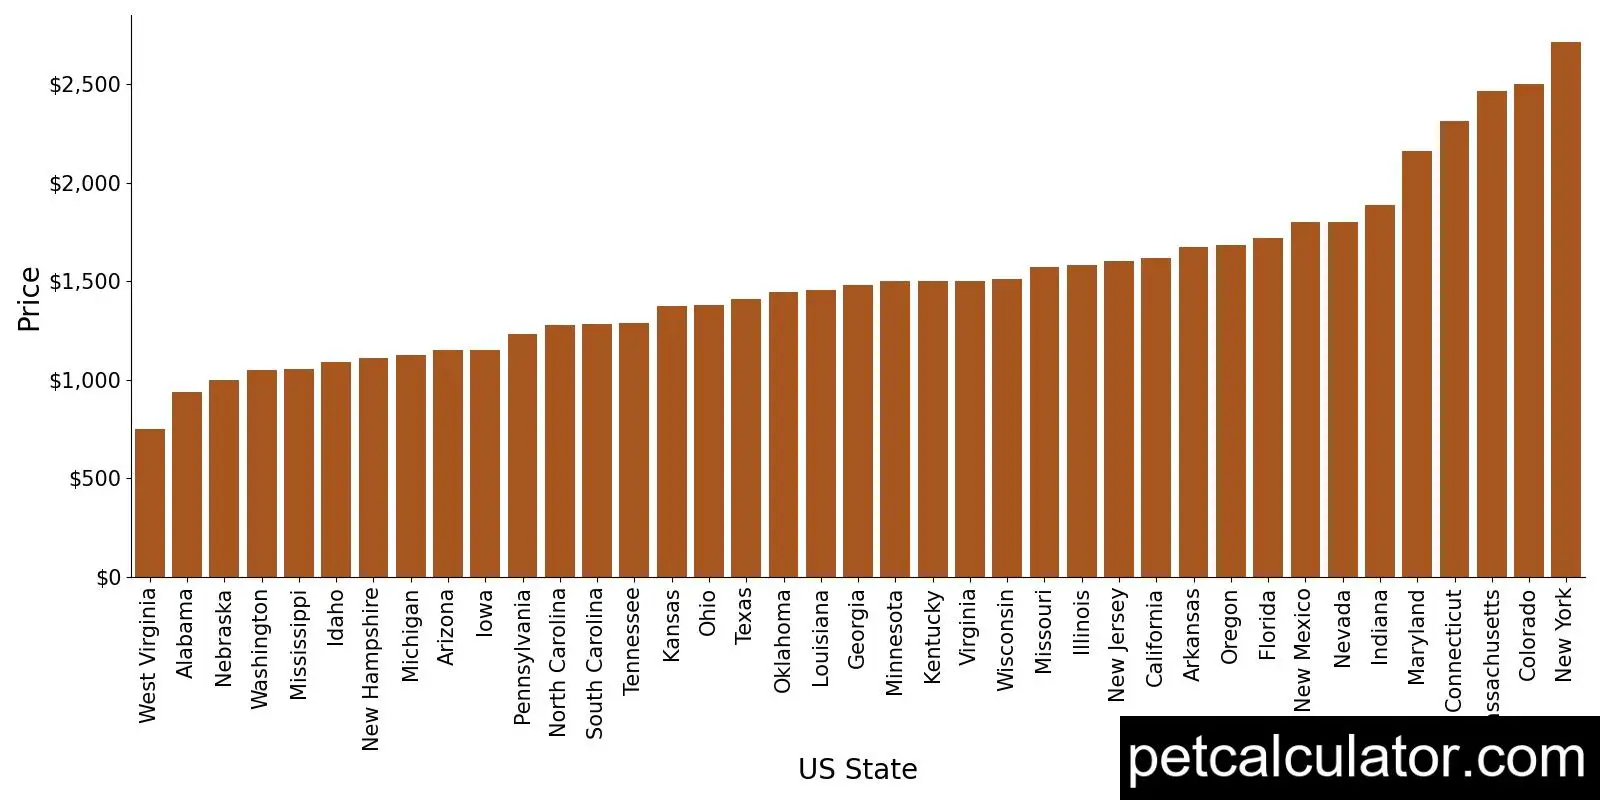 Price of Boston Terrier by US State 